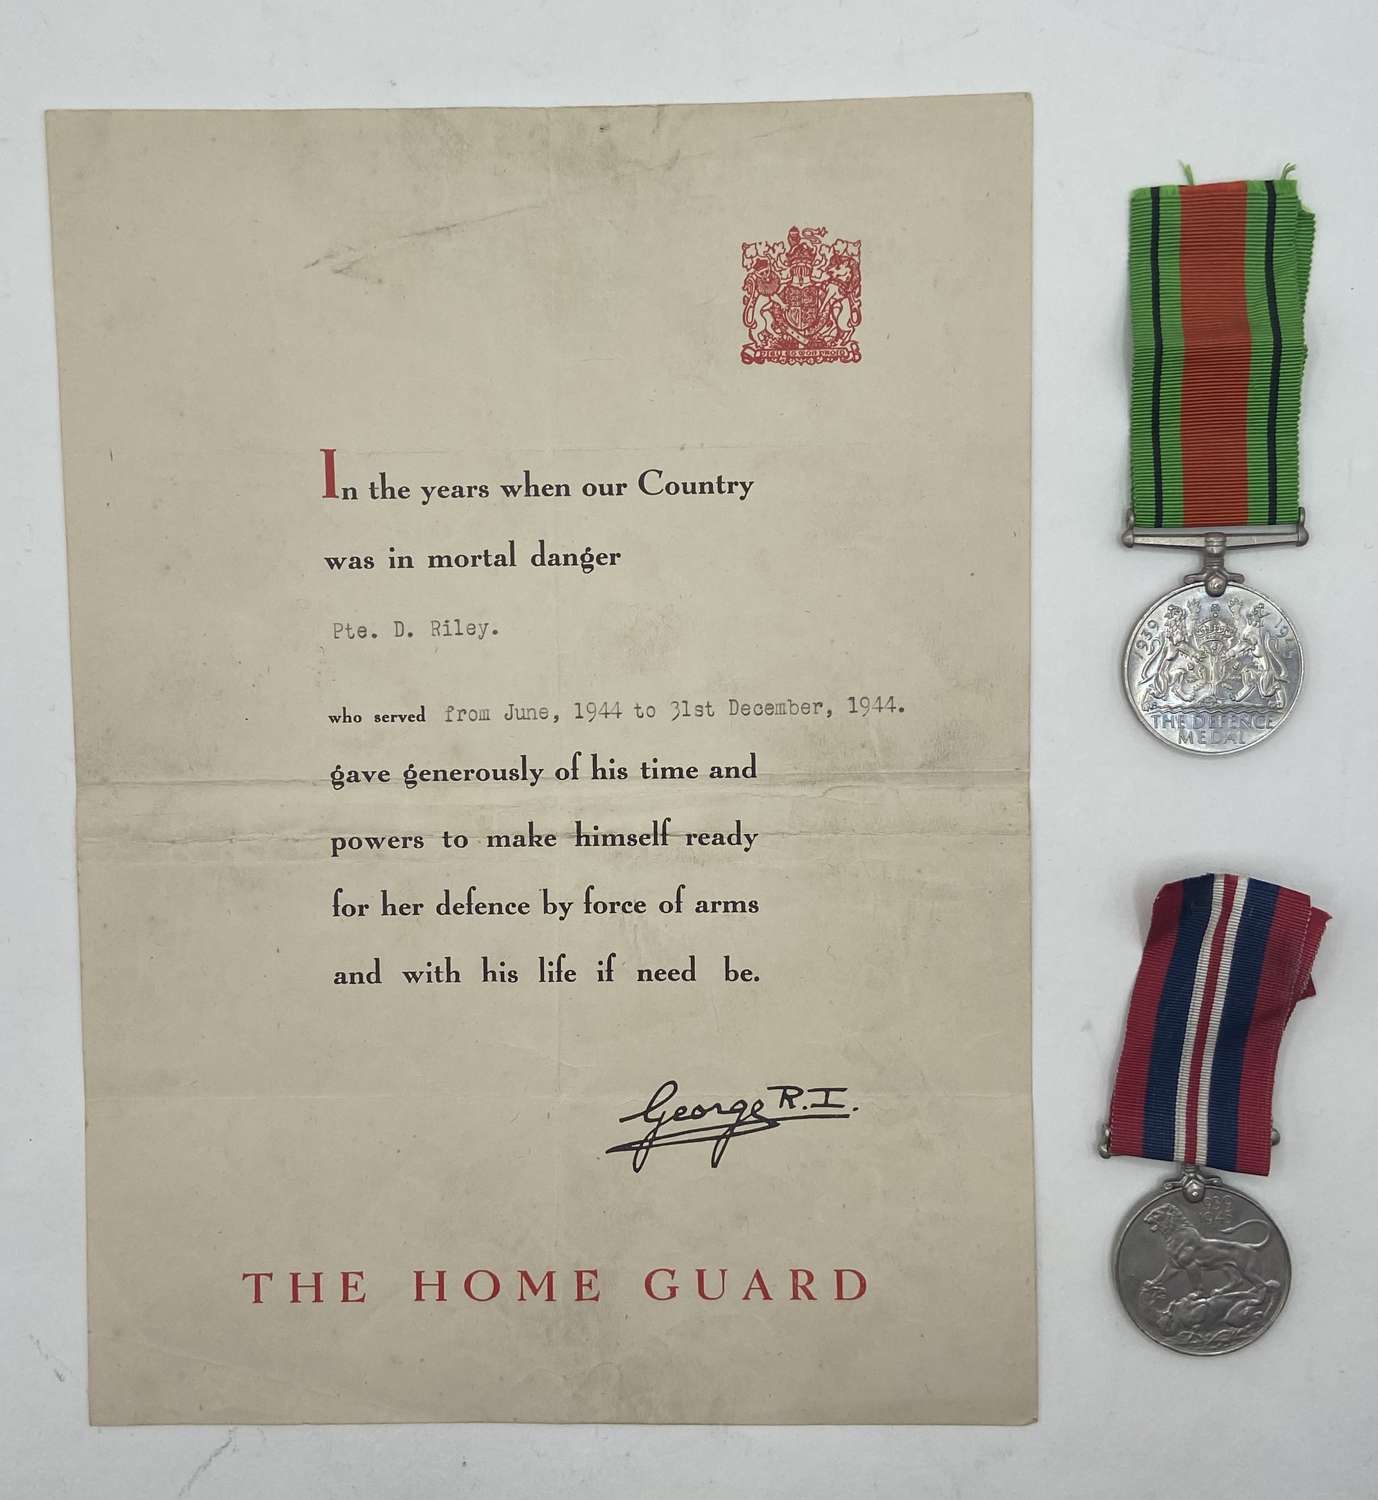 WW2 British Home Guard Service Certificate & Medals Pte D Riley 1944